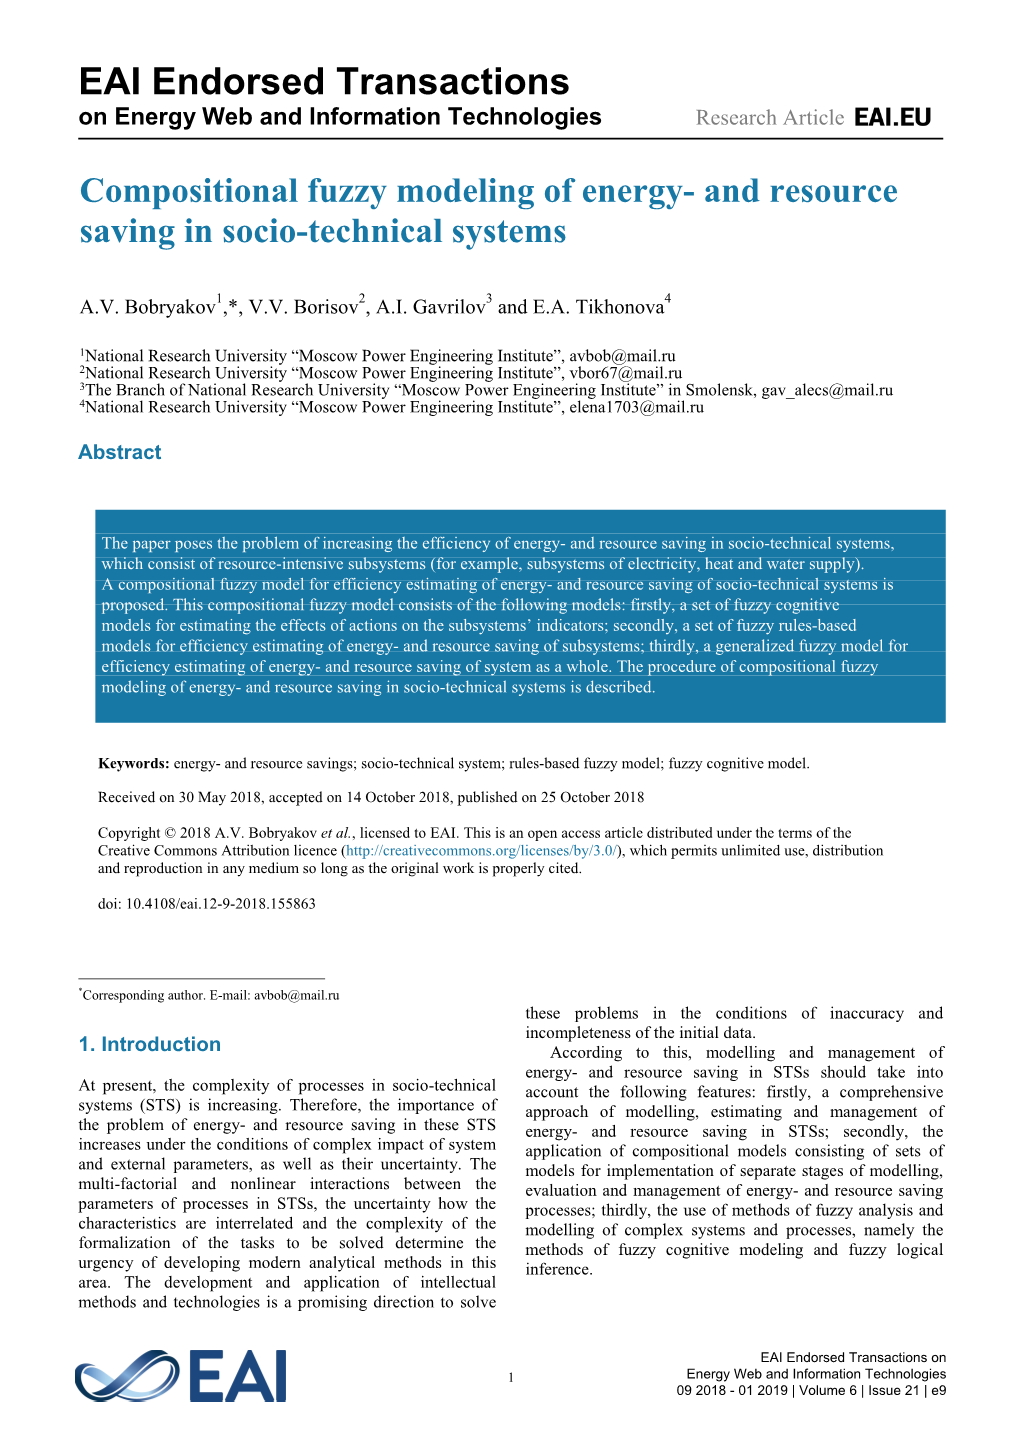 Compositional Fuzzy Modeling of Energy- and Resource Saving in Socio-Technical Systems